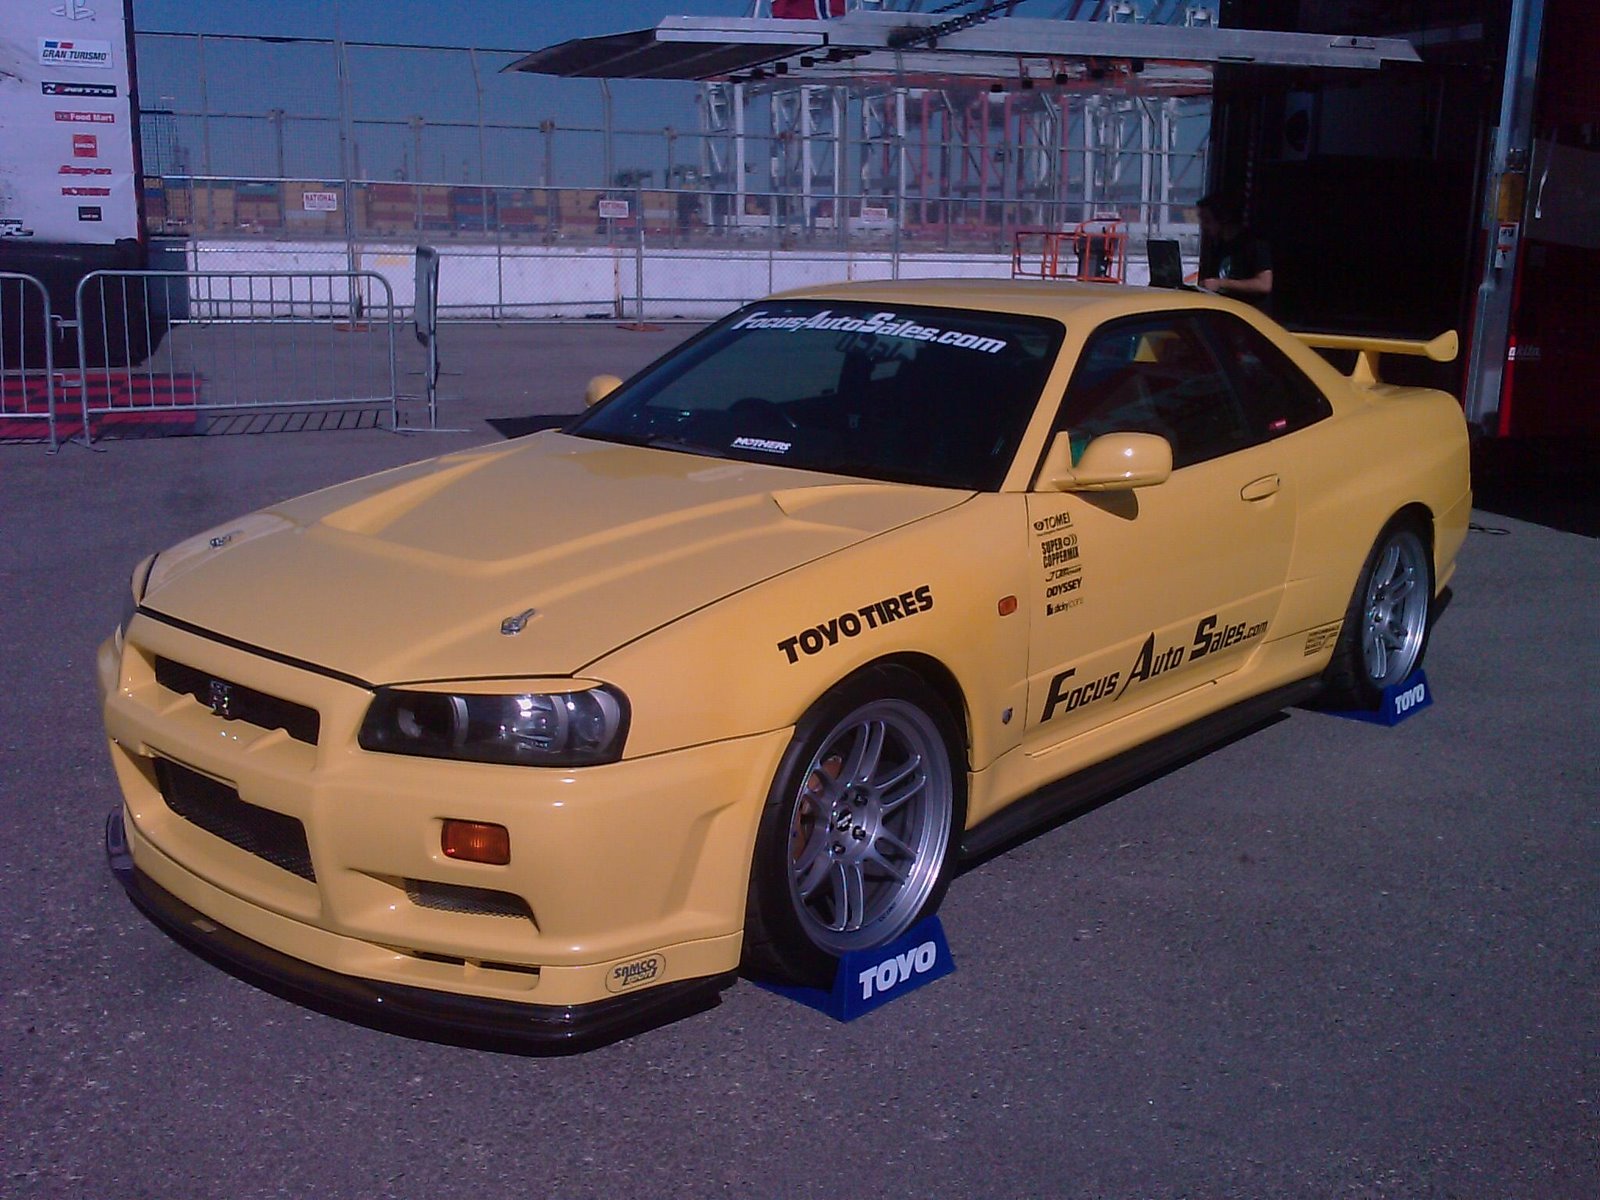 R34 Nissan Skyline Gt R For Sale In The Usa Nissan Skyline Gt R S In The Usa